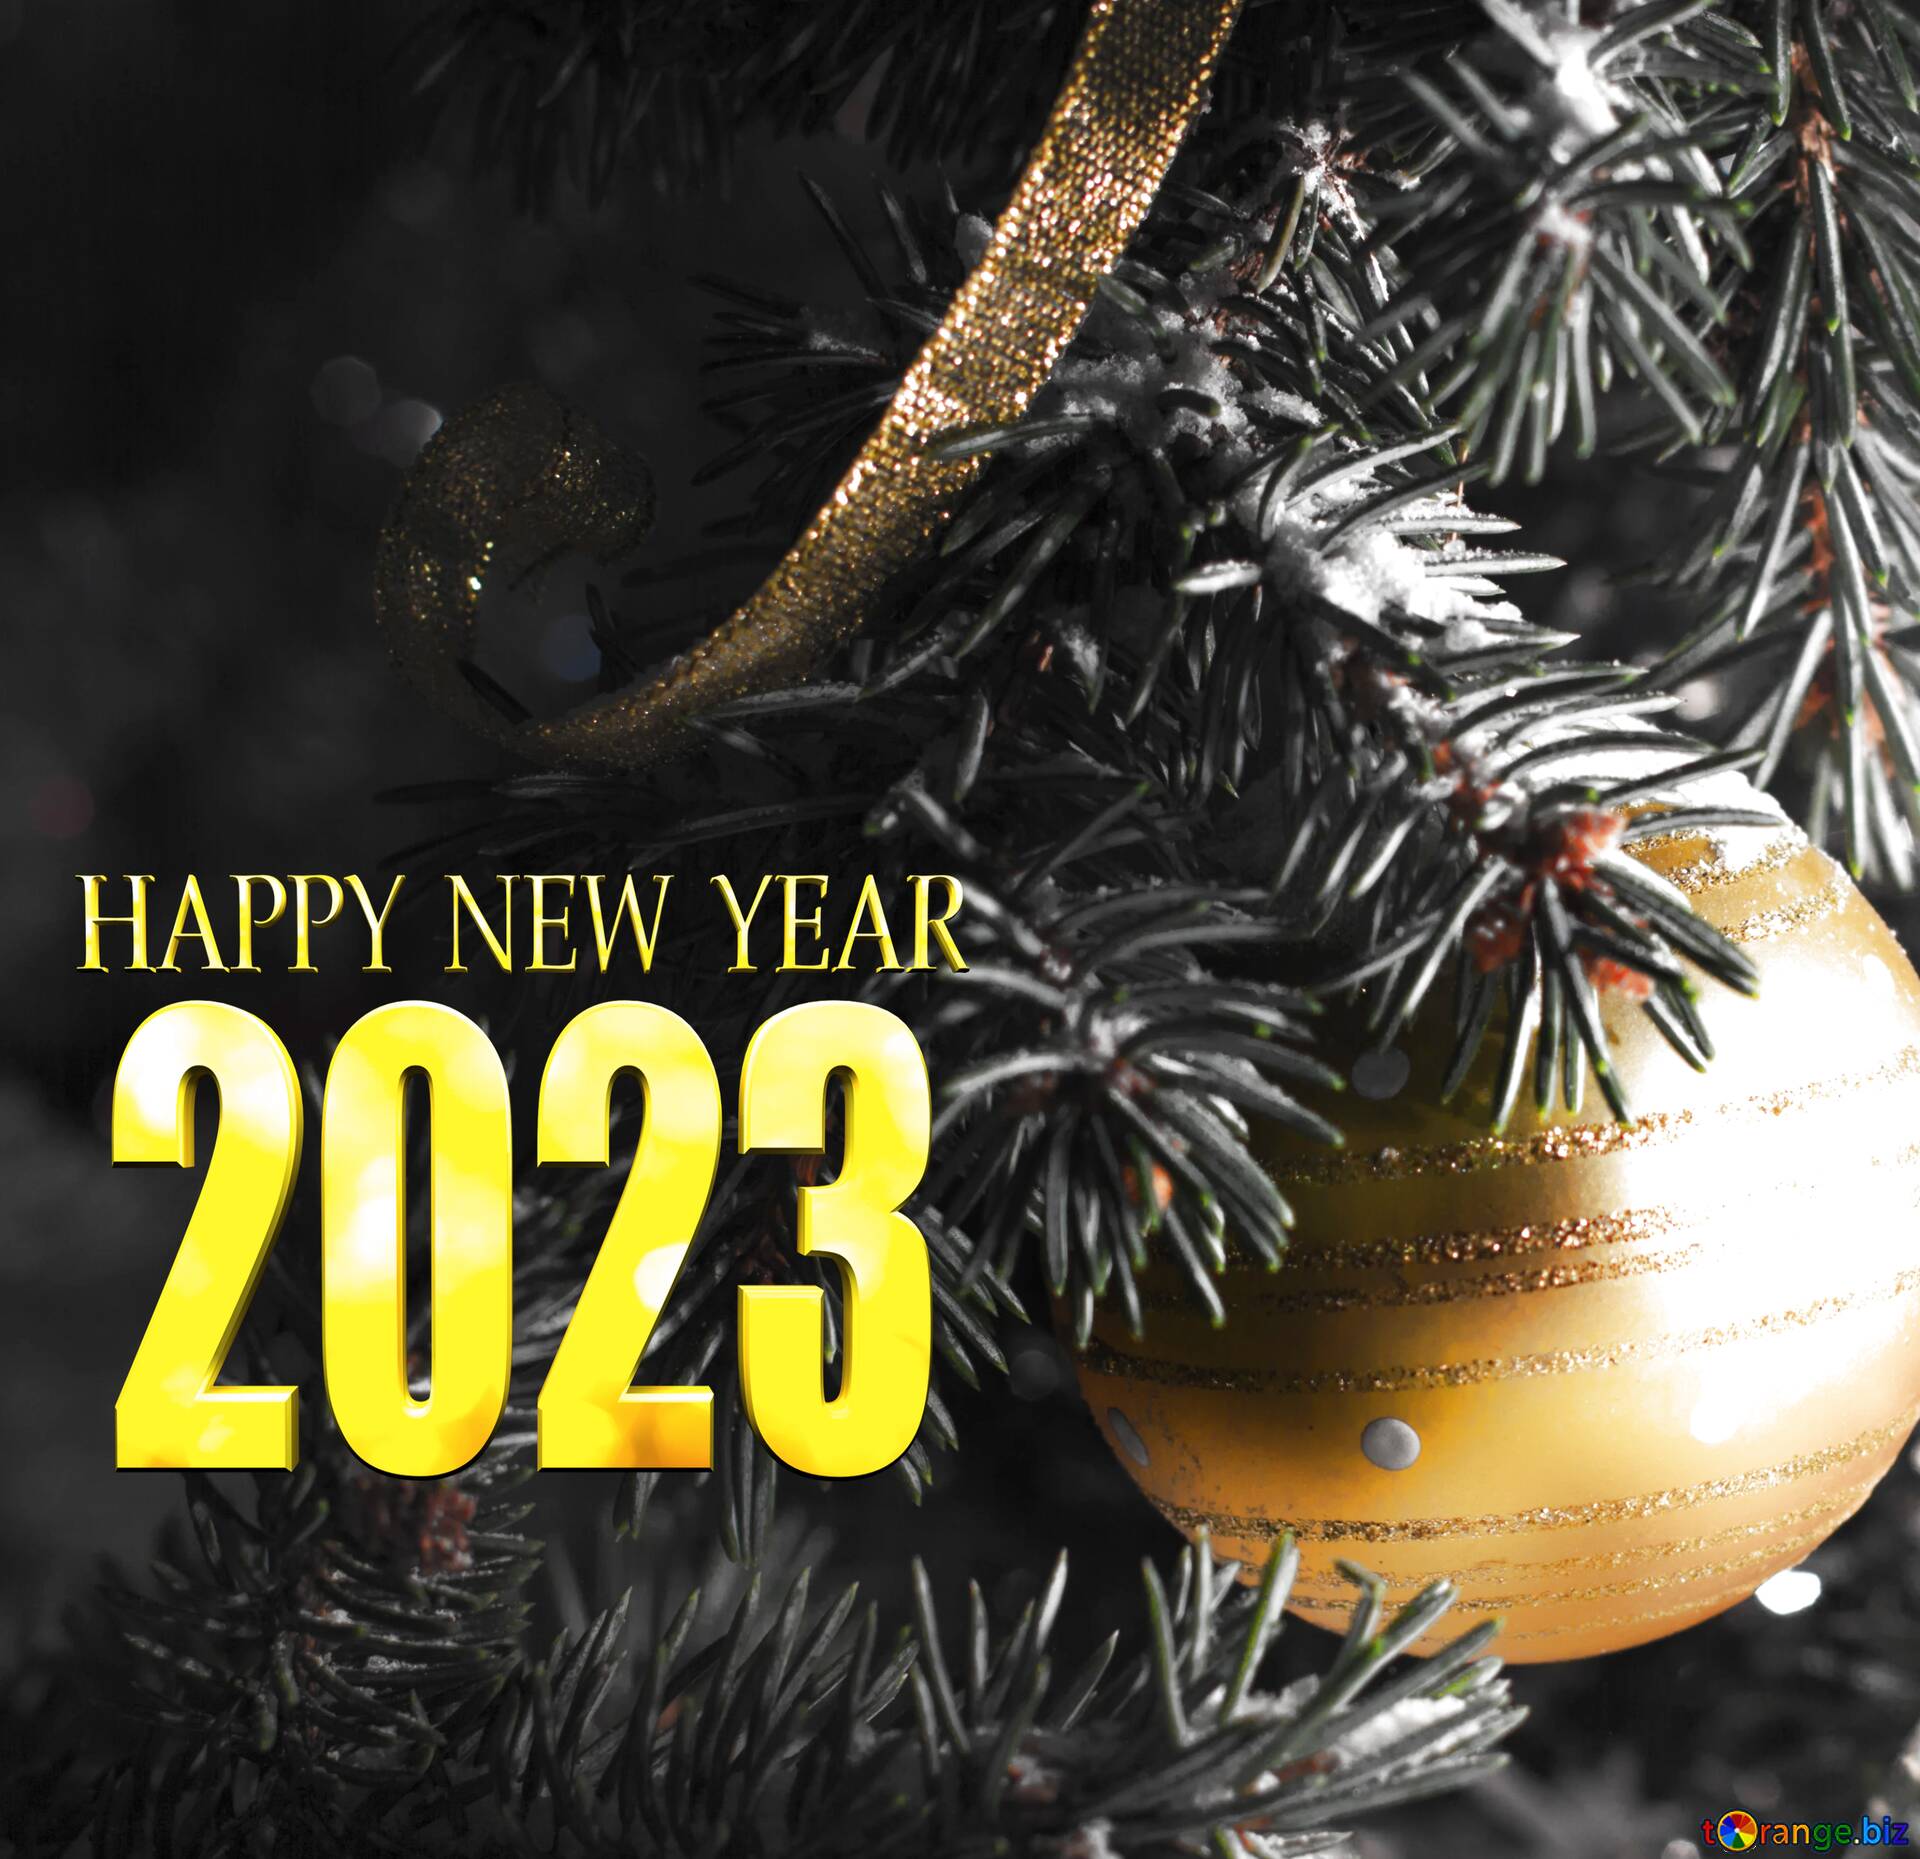 Download Free Picture Happy New Year 2023 On CC BY License Free Image Stock TOrange.biz Fx №24189